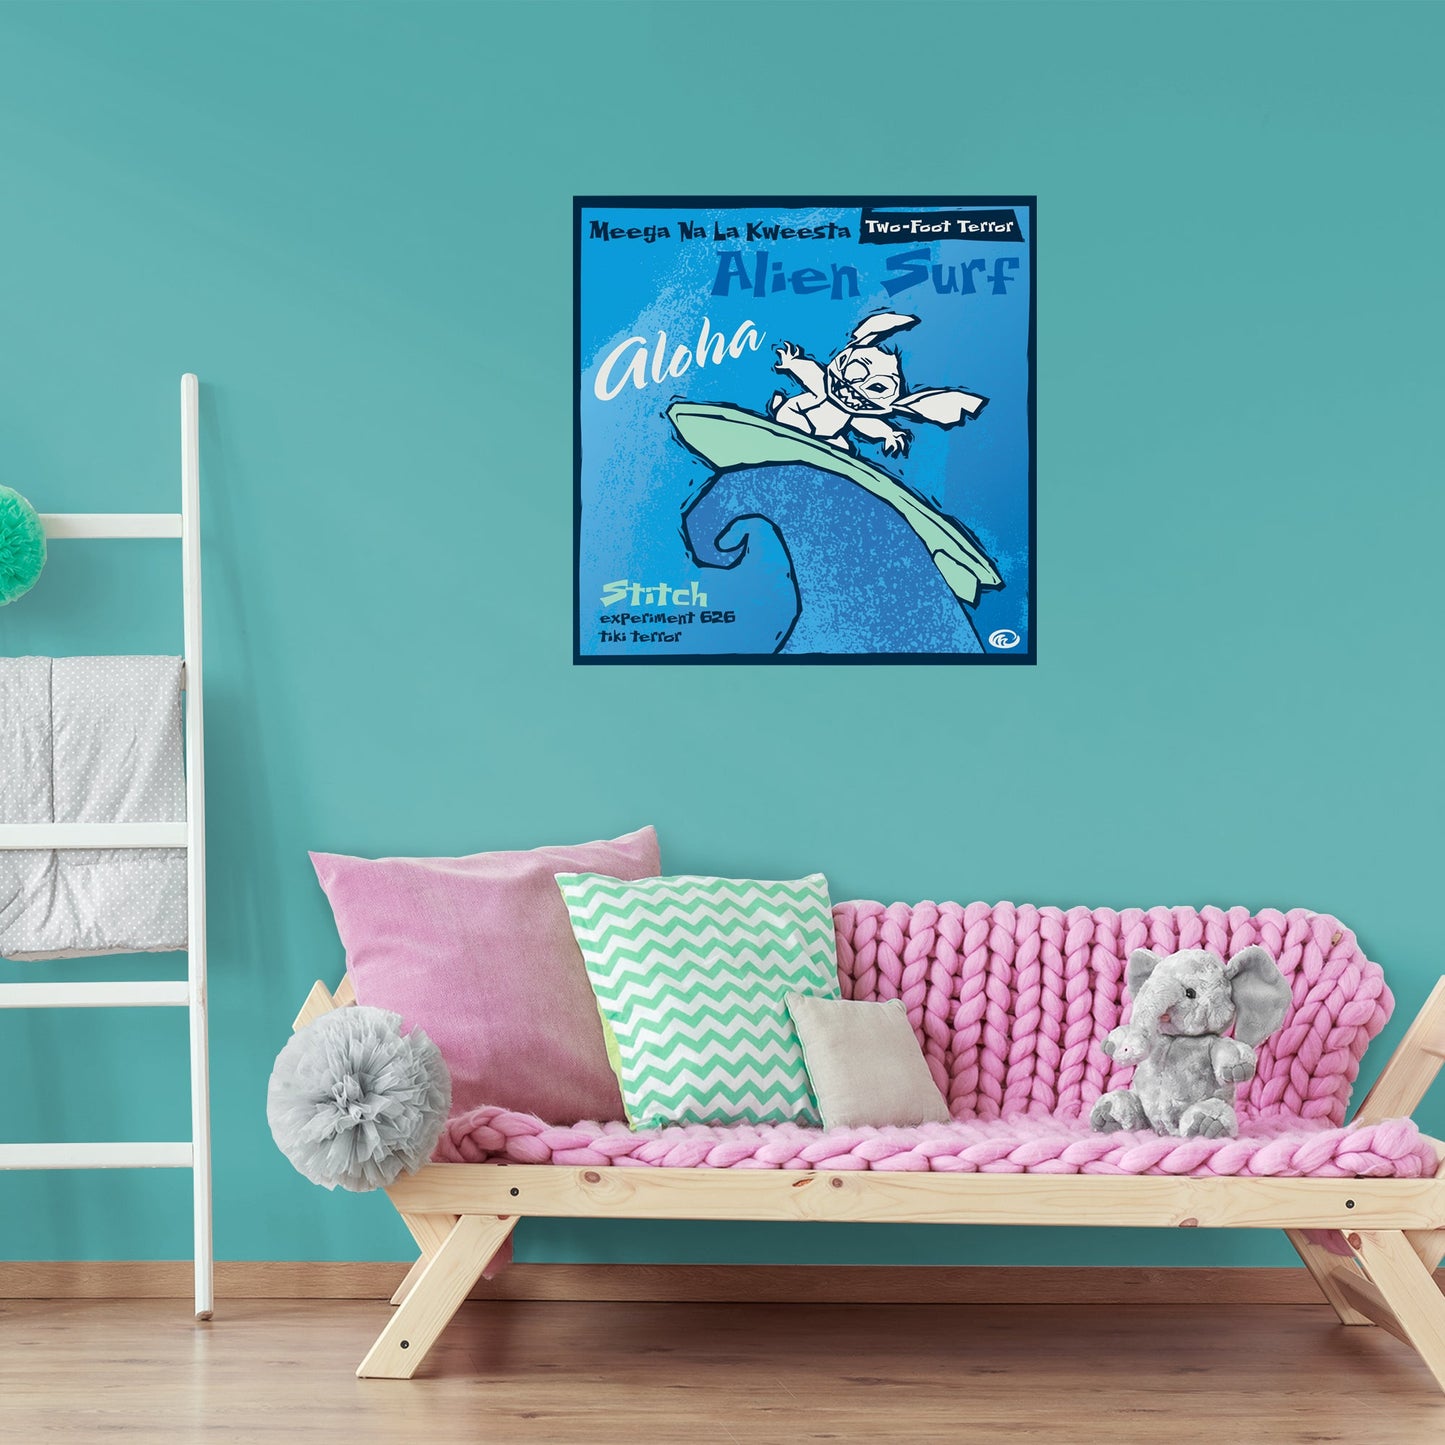 Lilo & Stitch: Stitch Alien Surf Mural - Officially Licensed Disney Removable Adhesive Decal